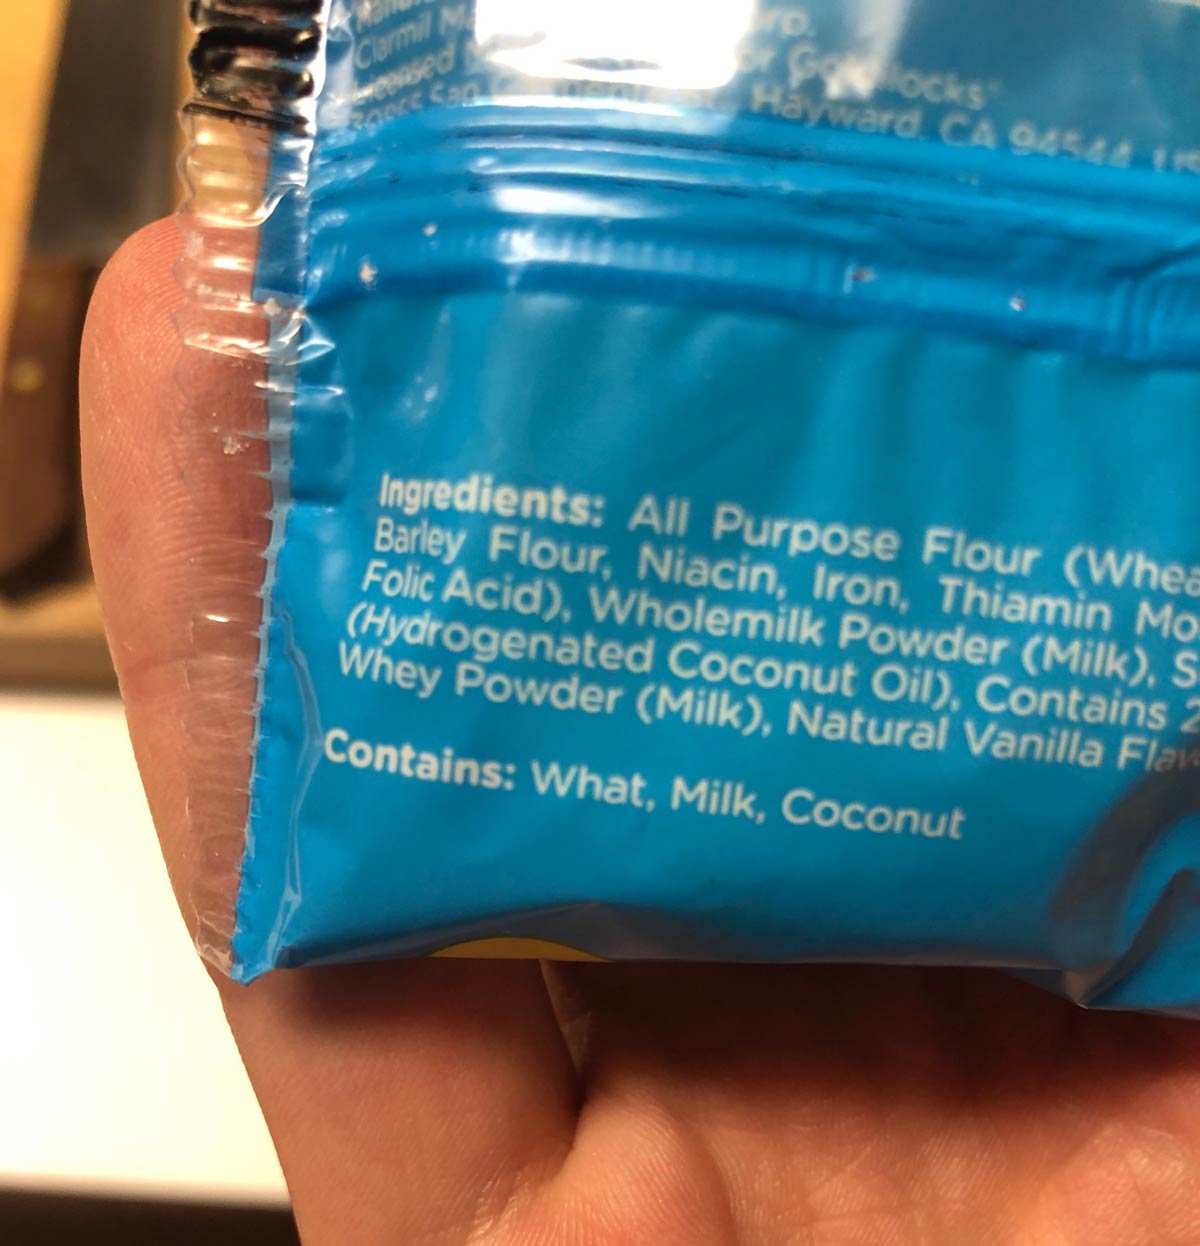 My cookie contains what?